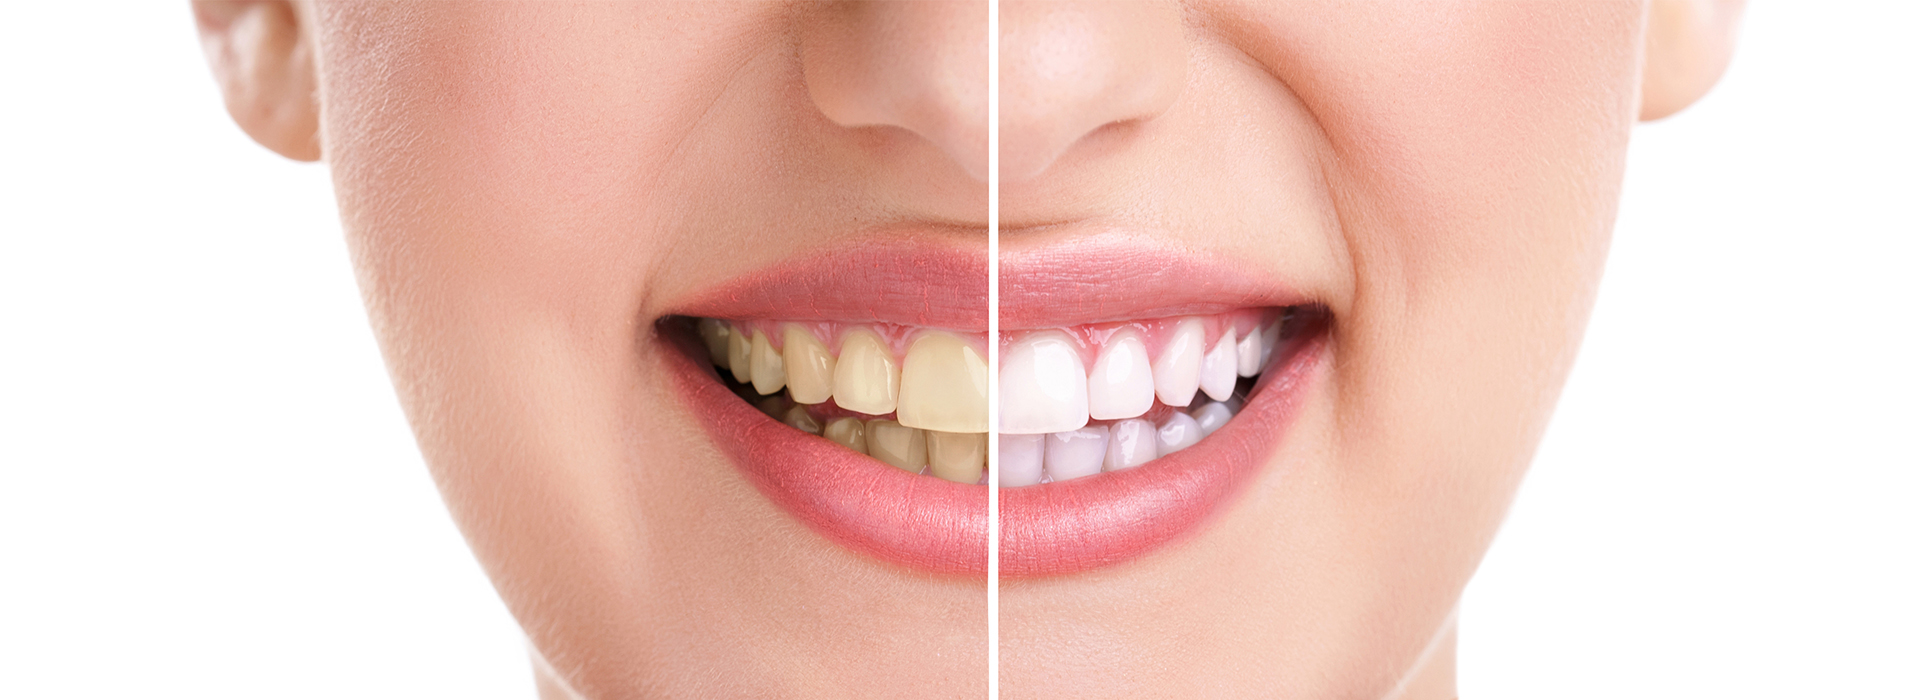 The image shows a close-up of a smiling person with teeth whitening treatment applied, demonstrating the before and after effect.